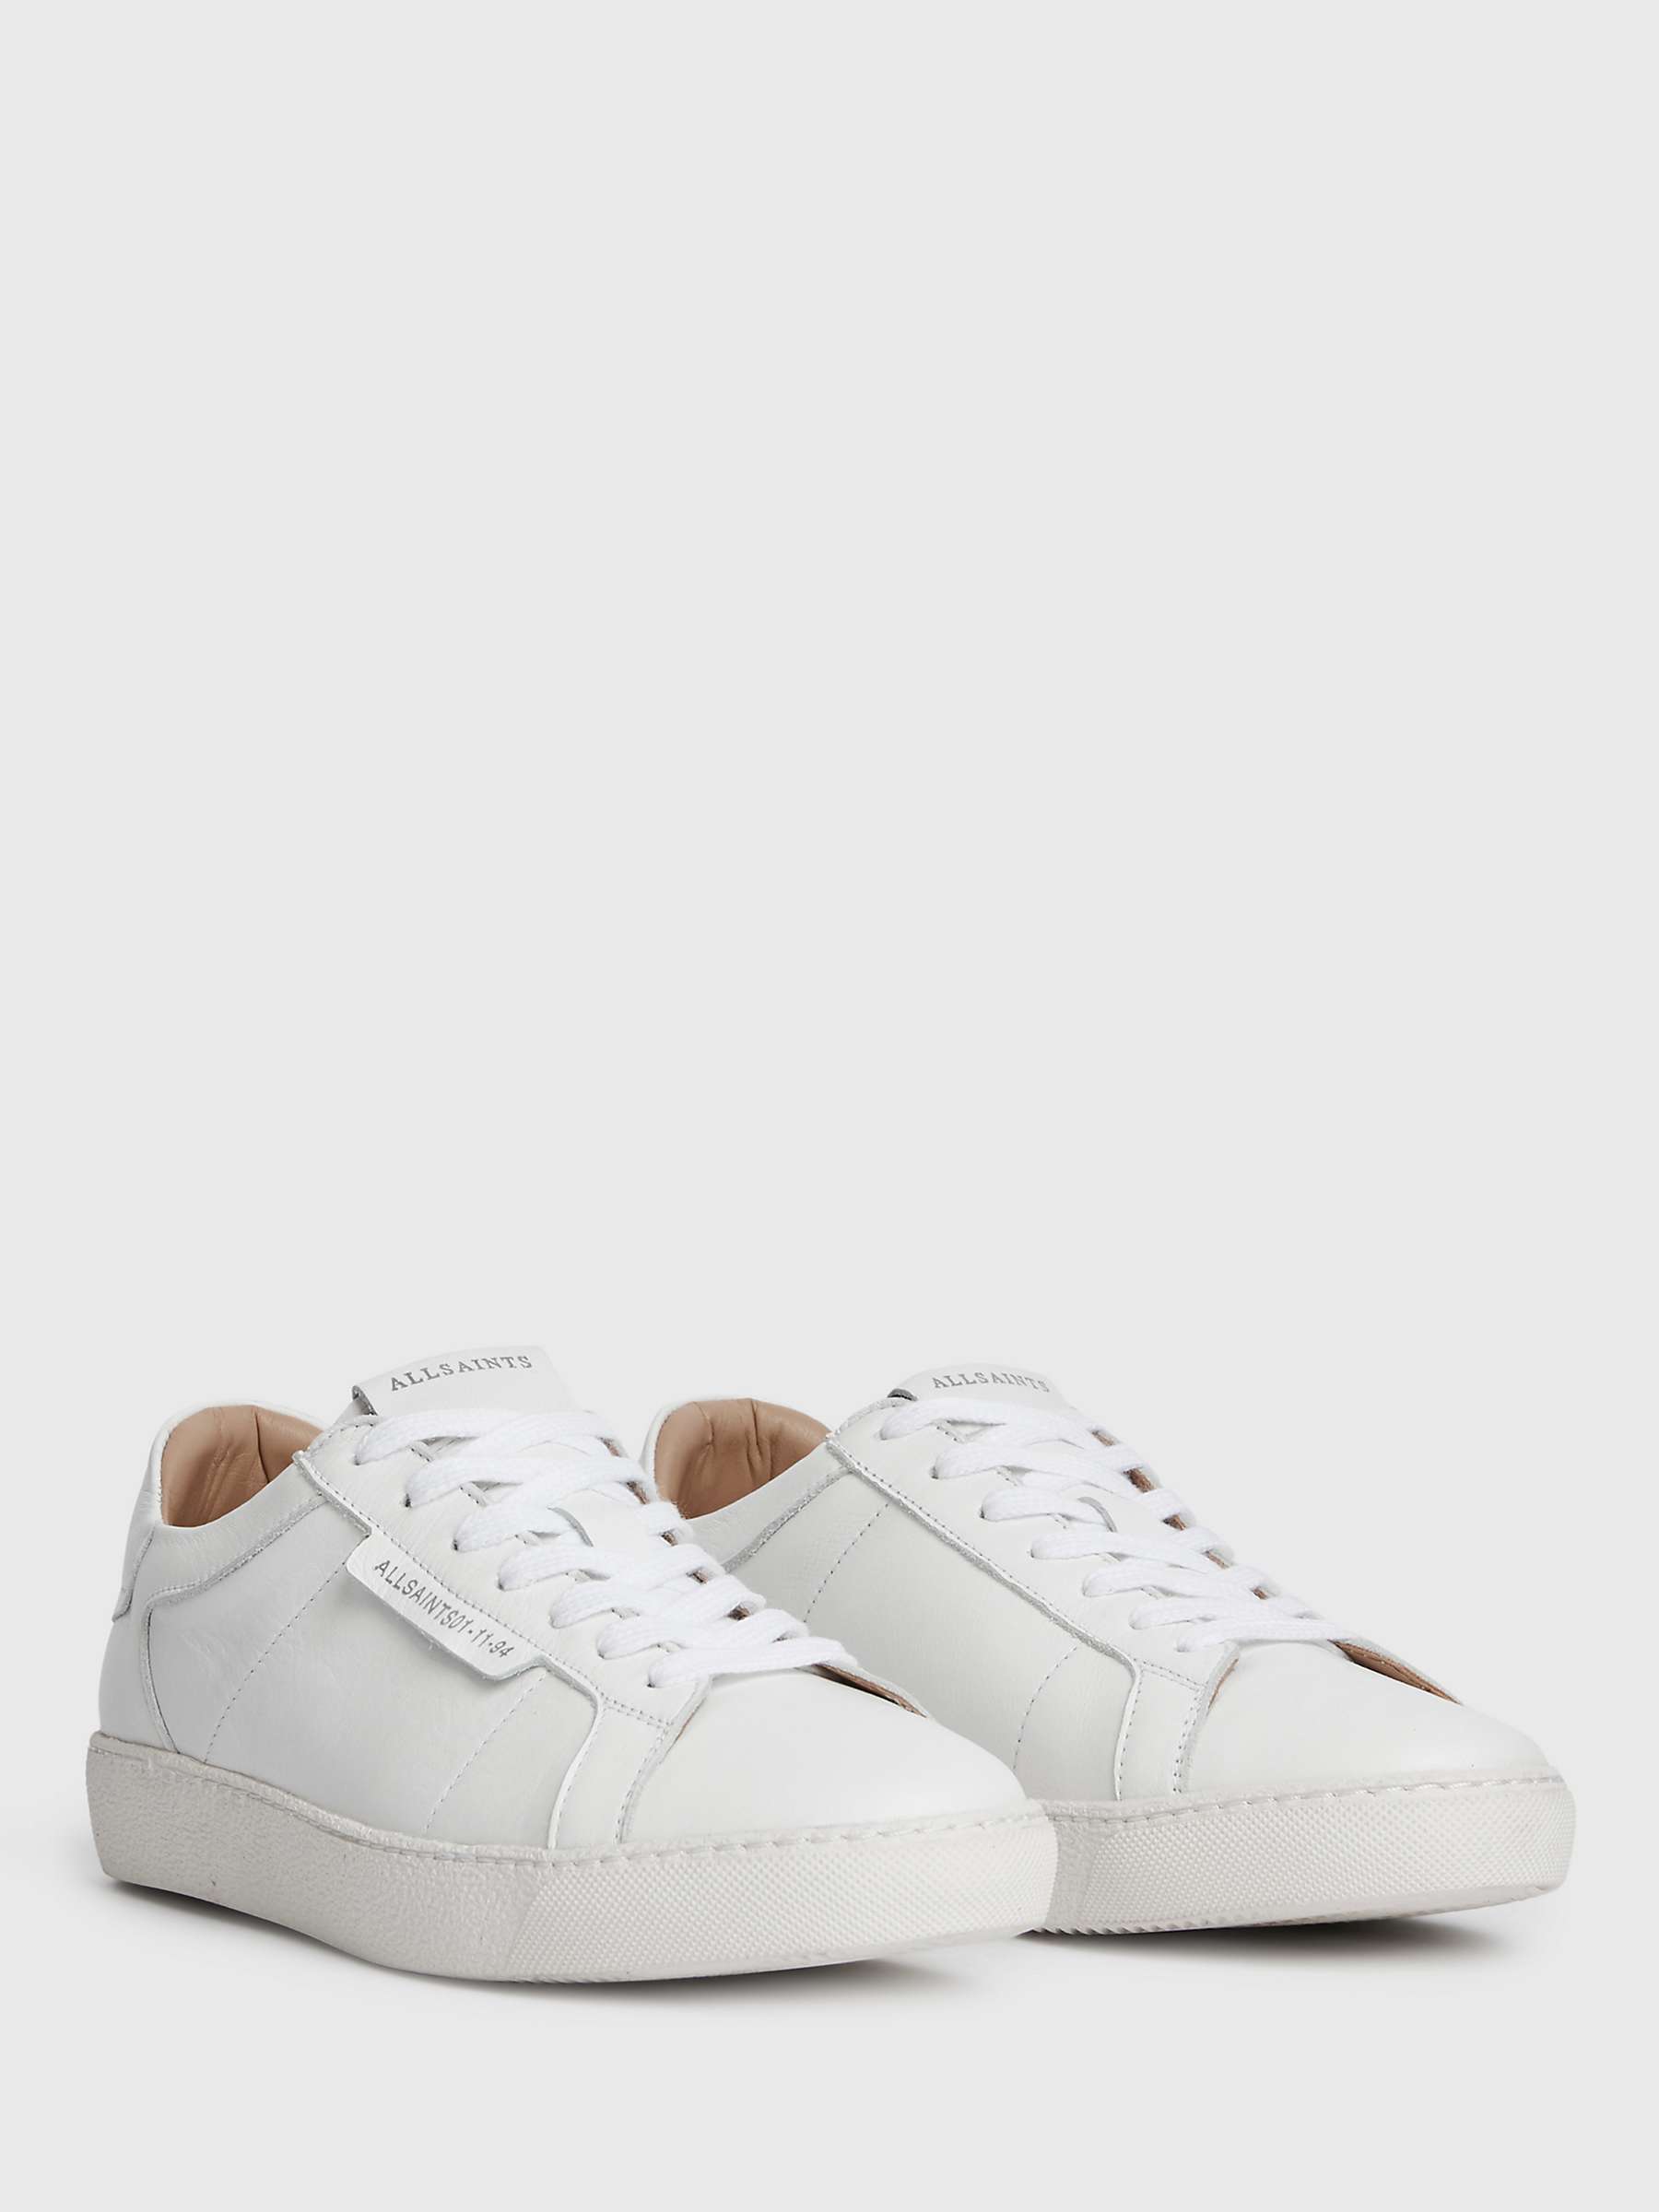 Buy AllSaints Sheer Low Leather Trainers, White Online at johnlewis.com